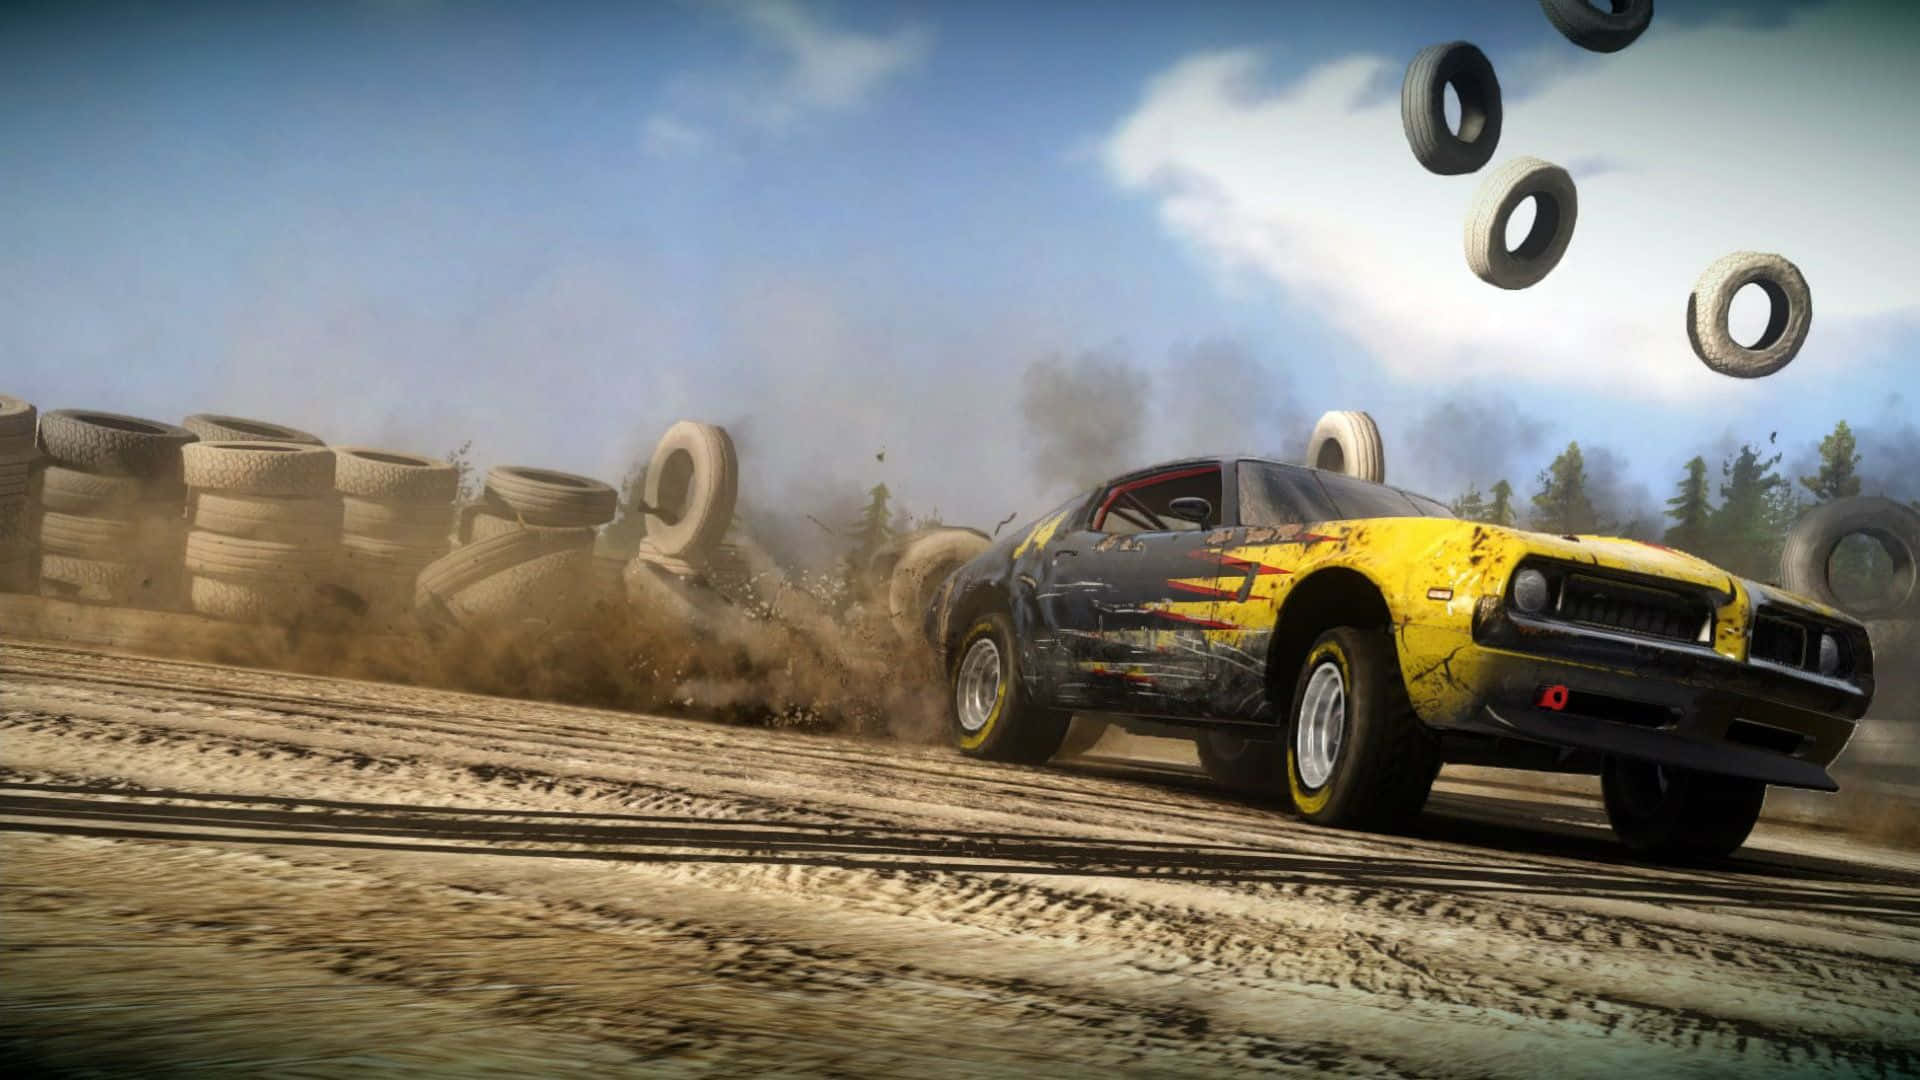 High-Octane Racing Action on a Stunning Track Wallpaper